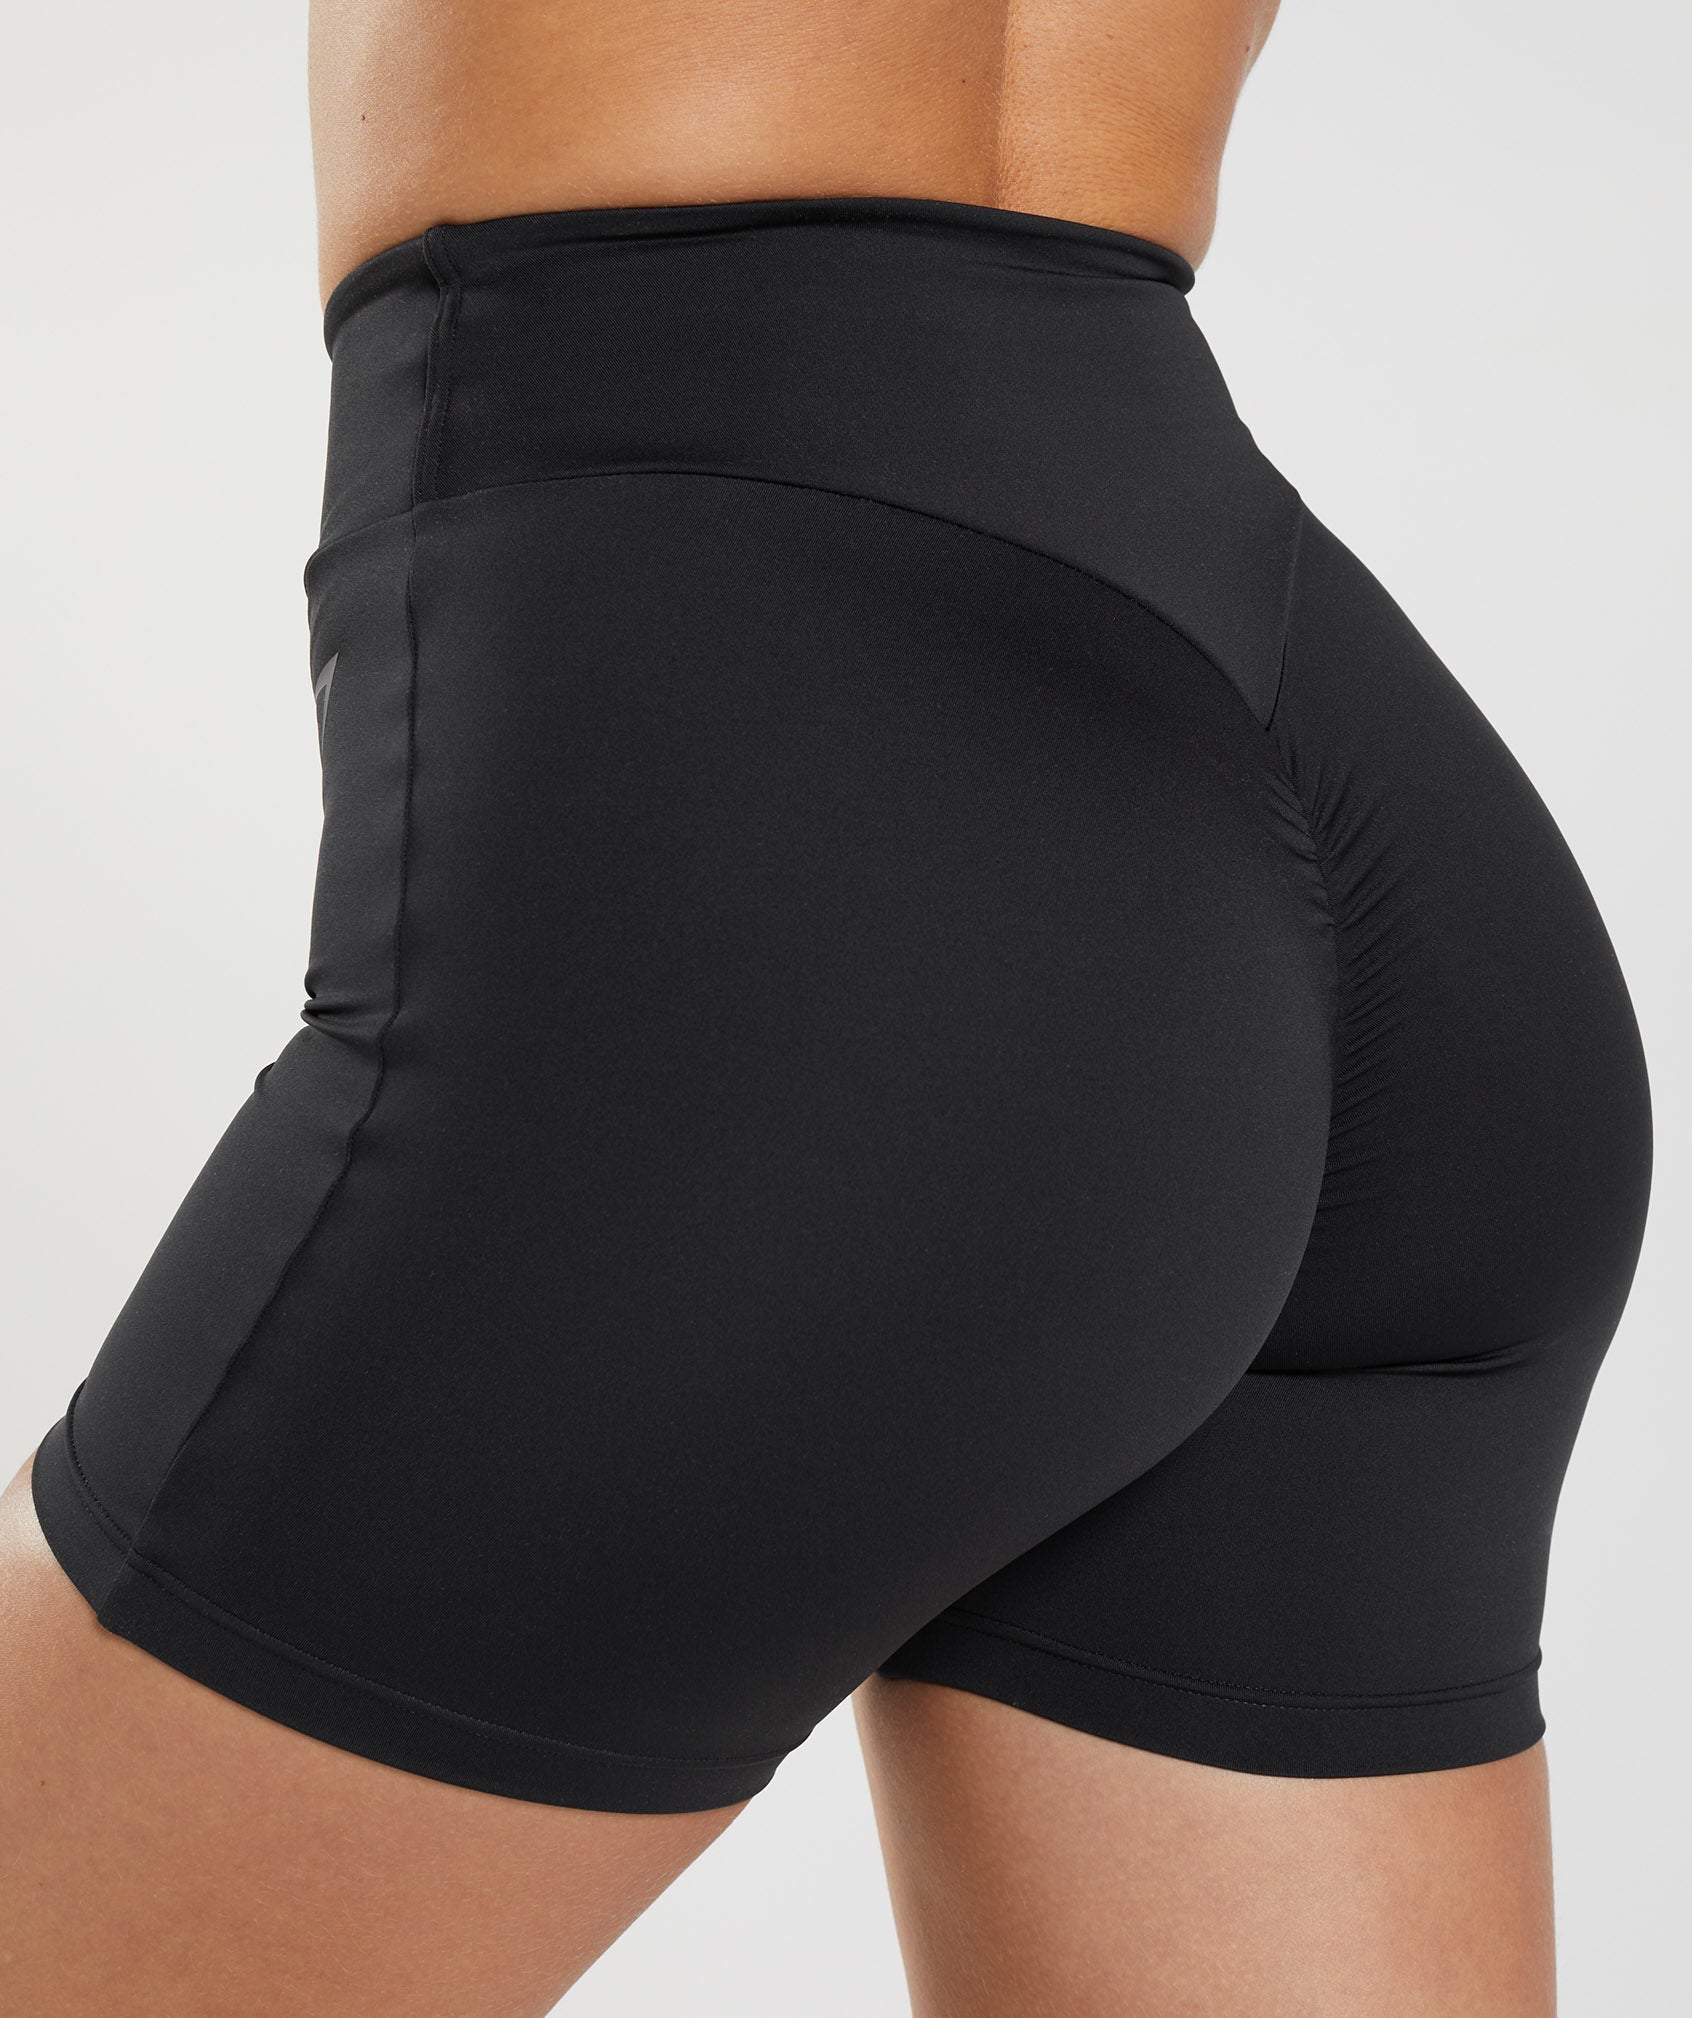 GS Power Original Tight Shorts in Black - view 5